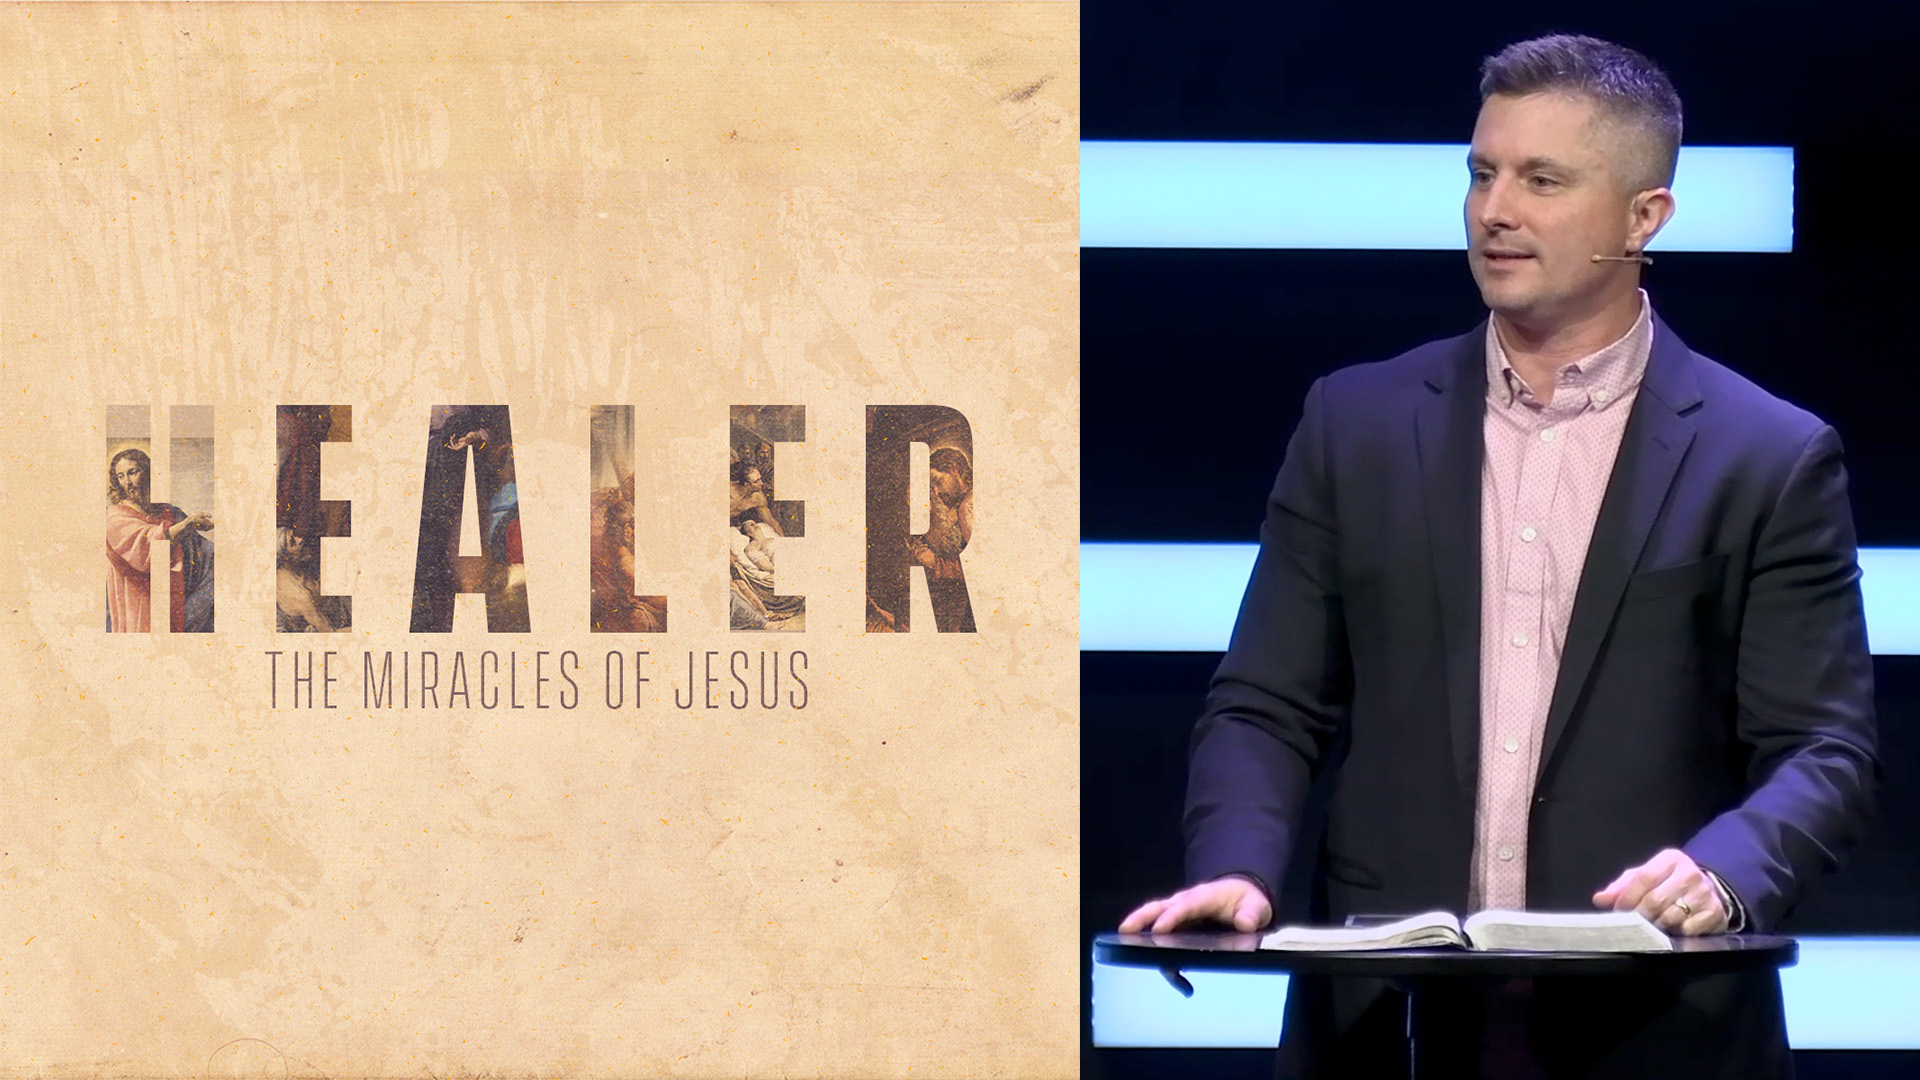 Easter Sunday - Healer - The Miracles of Jesus - Week Six